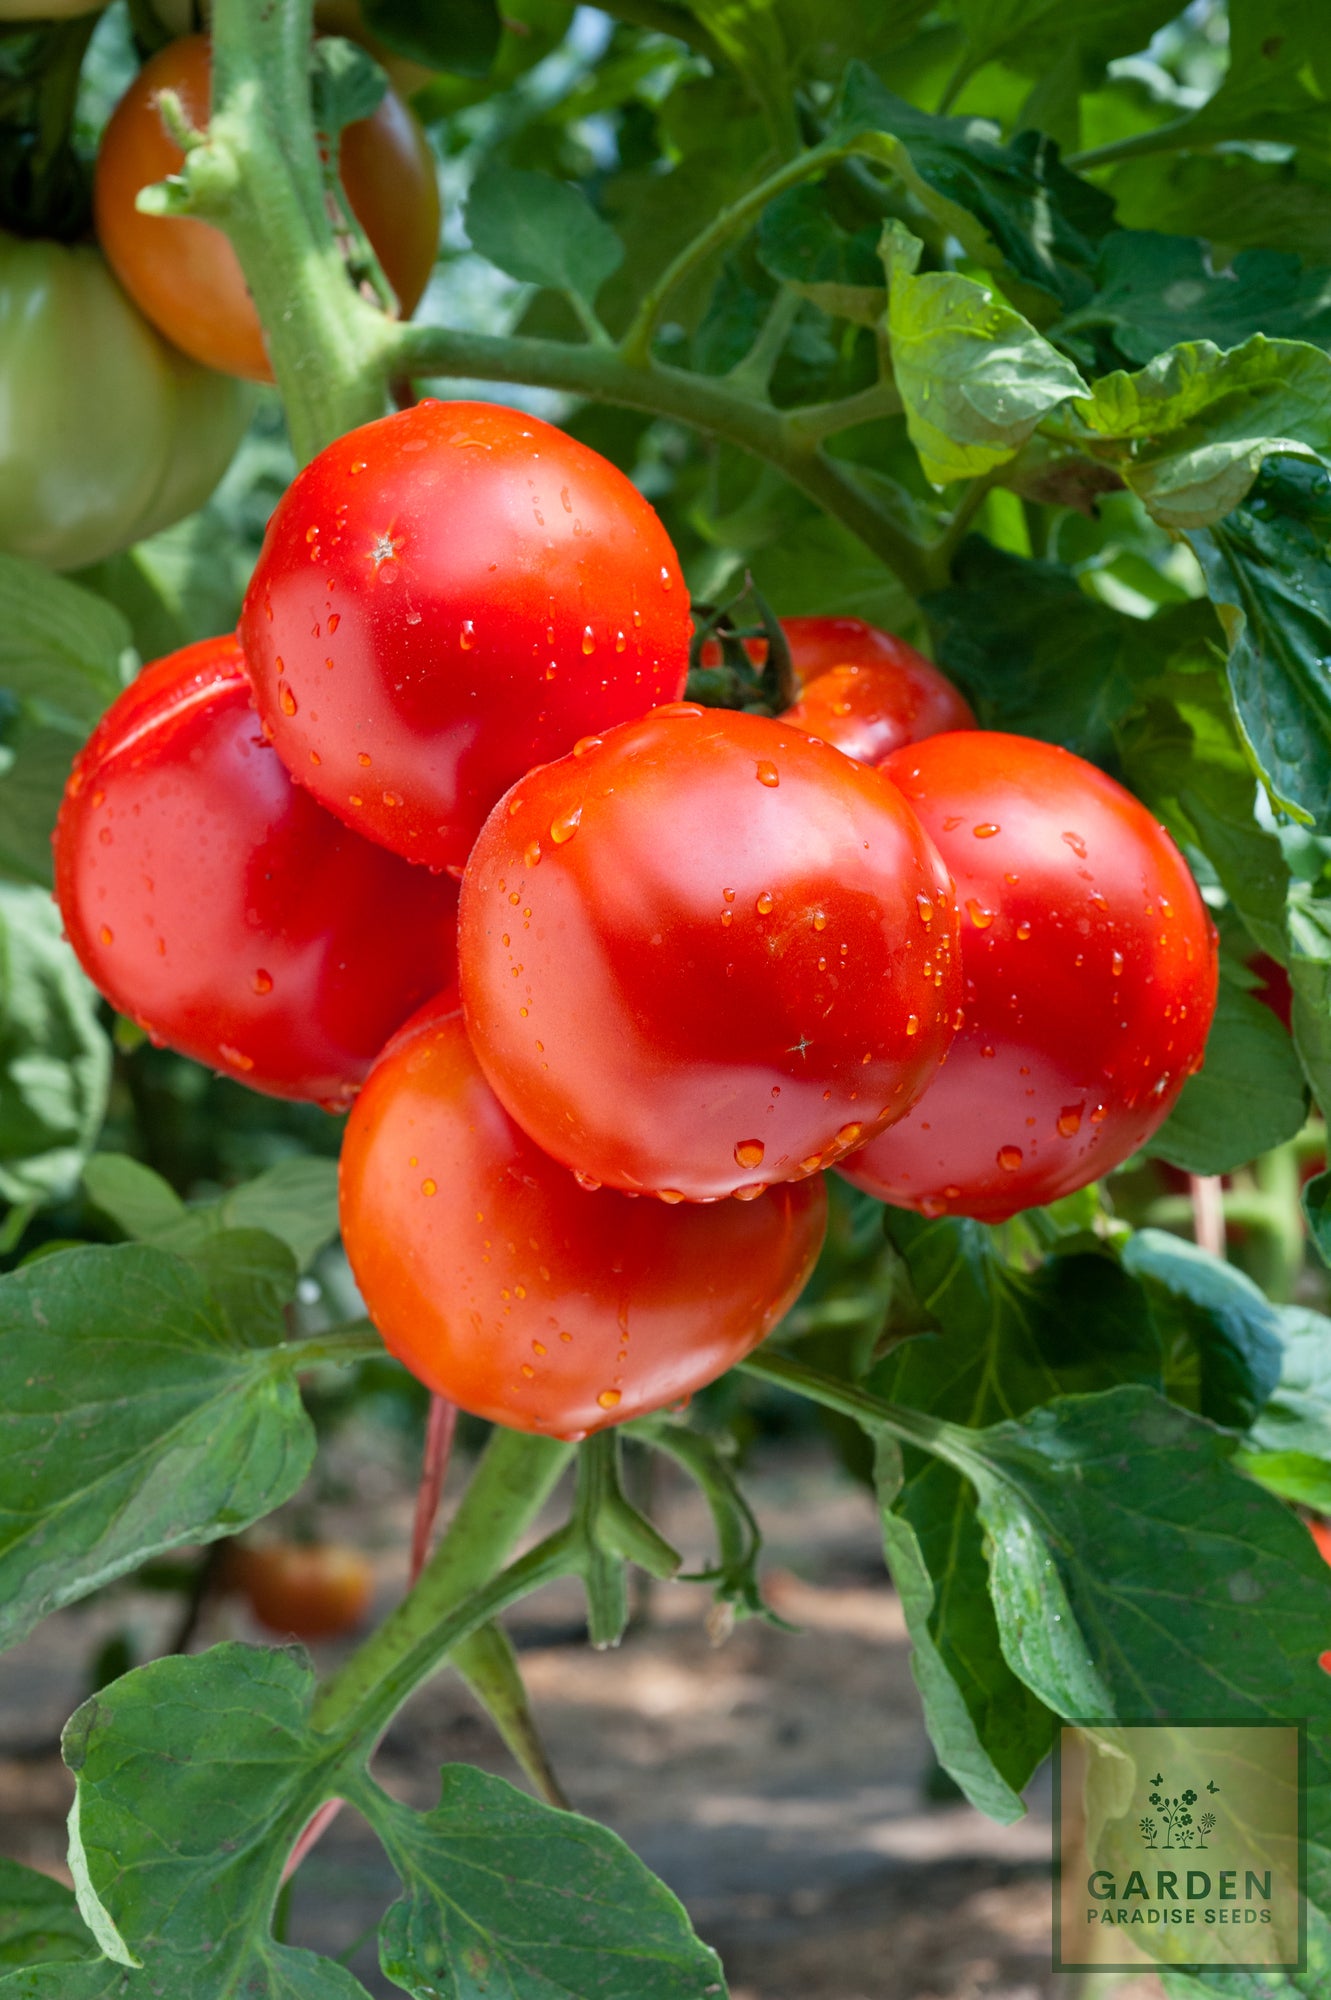 Elevate Your Garden: Get Tomato Seeds for Juicy and Nutritious Tomatoes